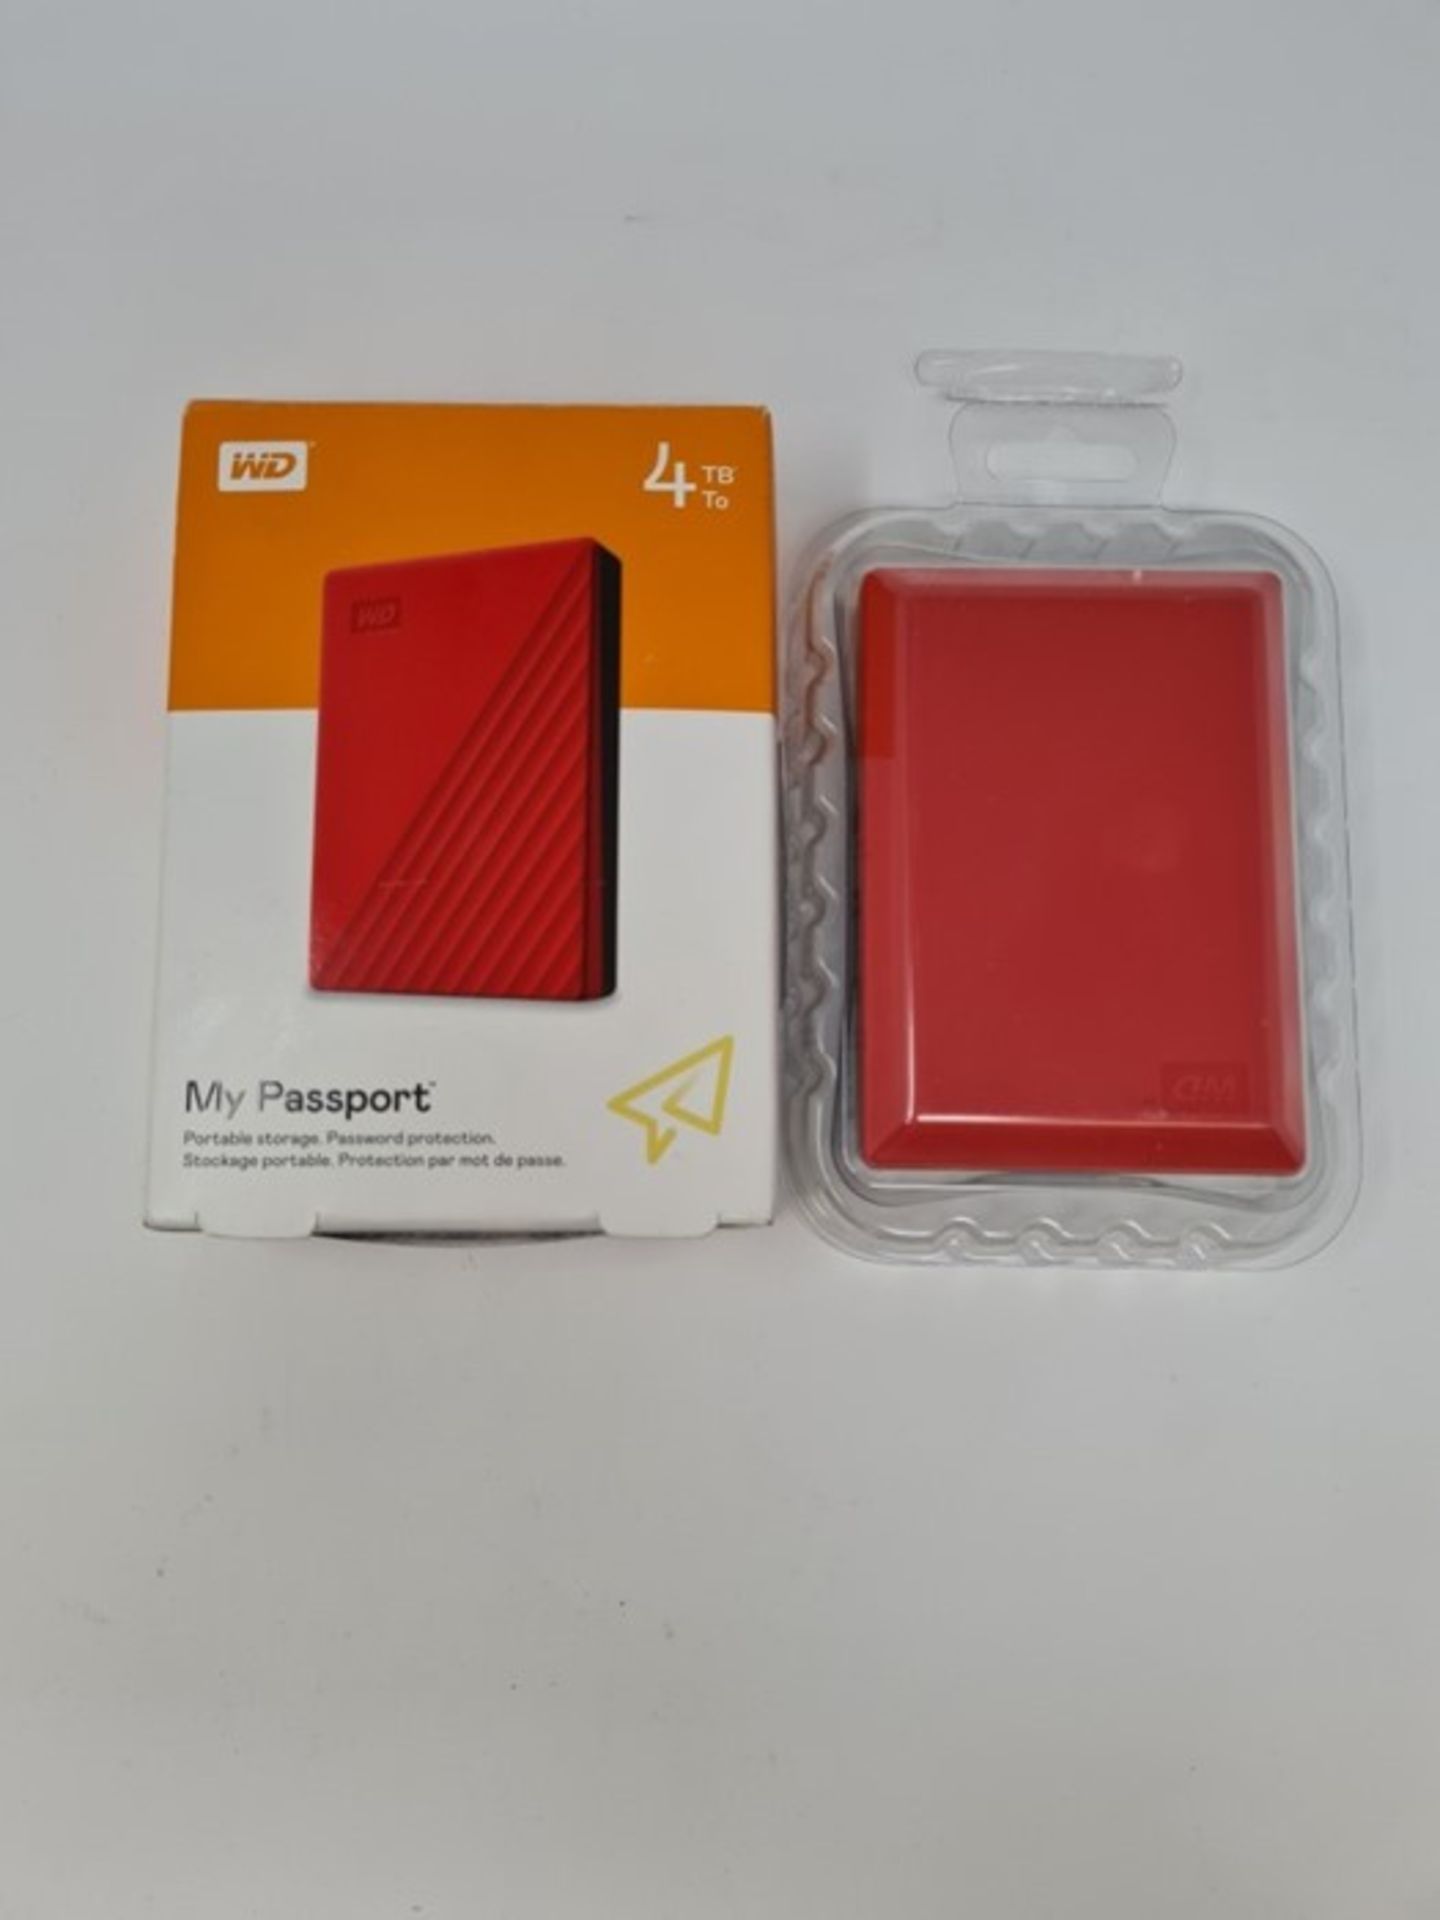 RRP £99.00 WD 4 TB My Passport Portable Hard Drive with Pas - Image 2 of 2